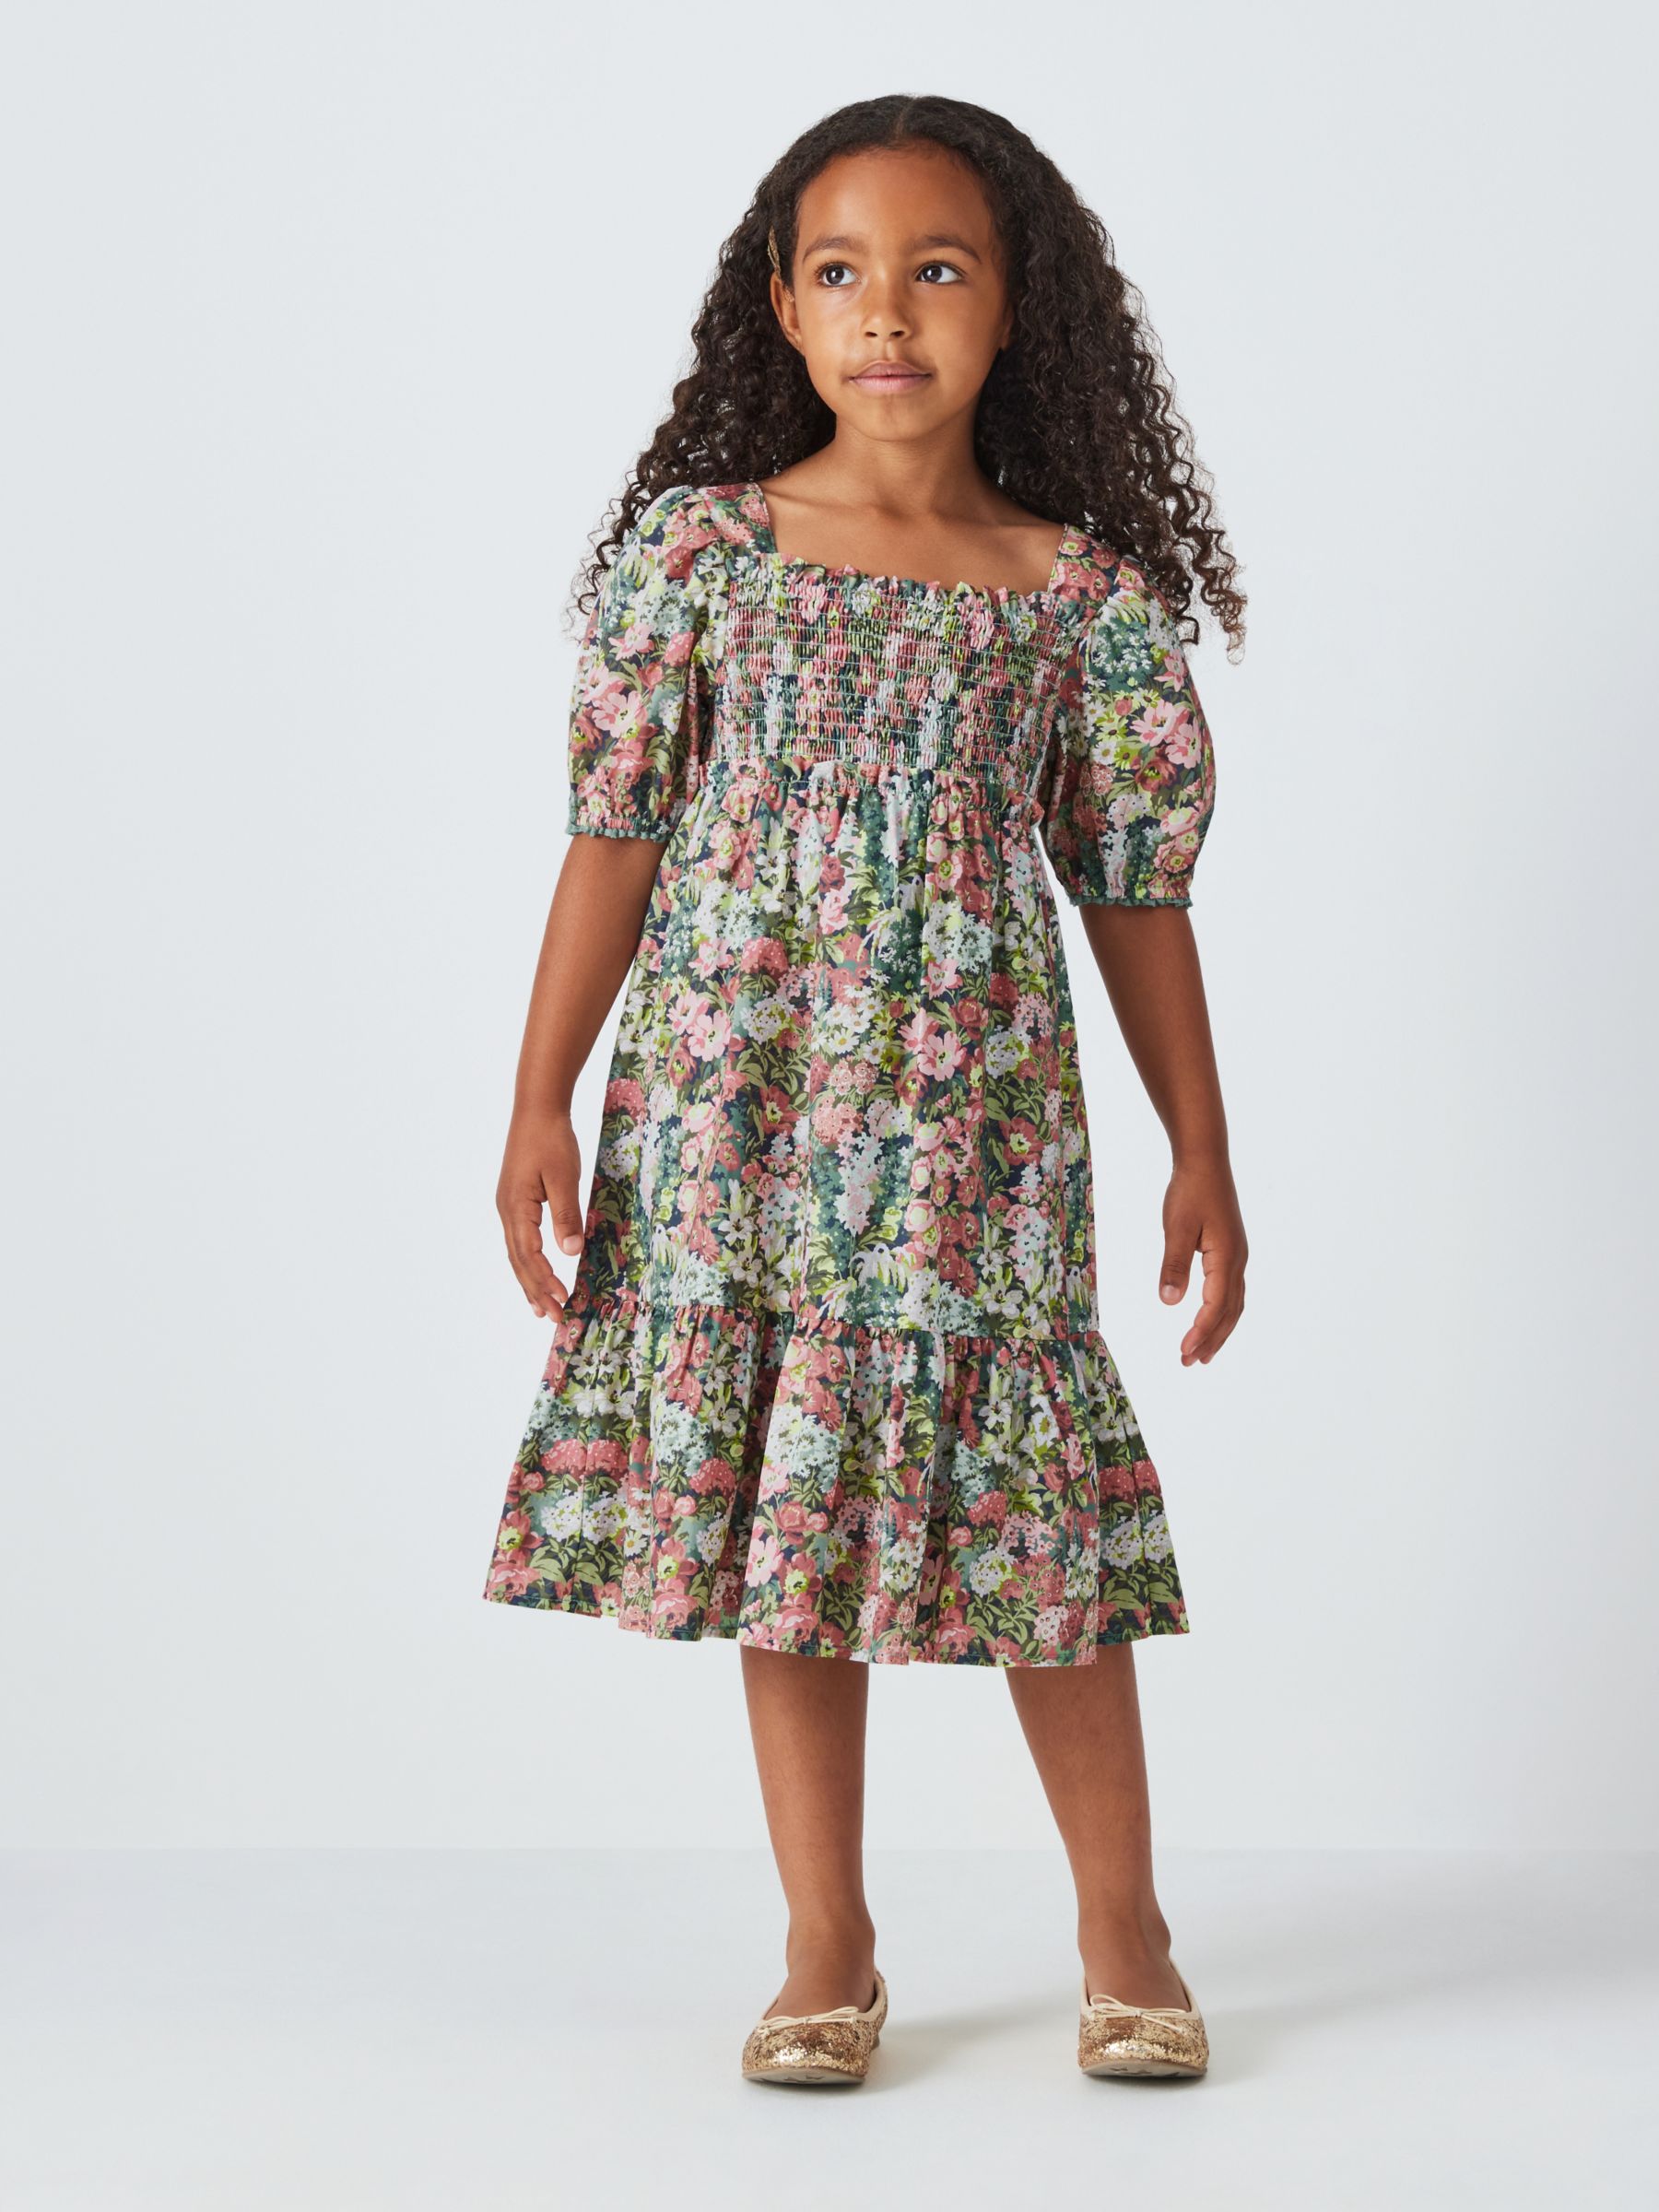 John Lewis Heirloom Collection Kids' Floral Ruffle Dress, Multi, 7 years